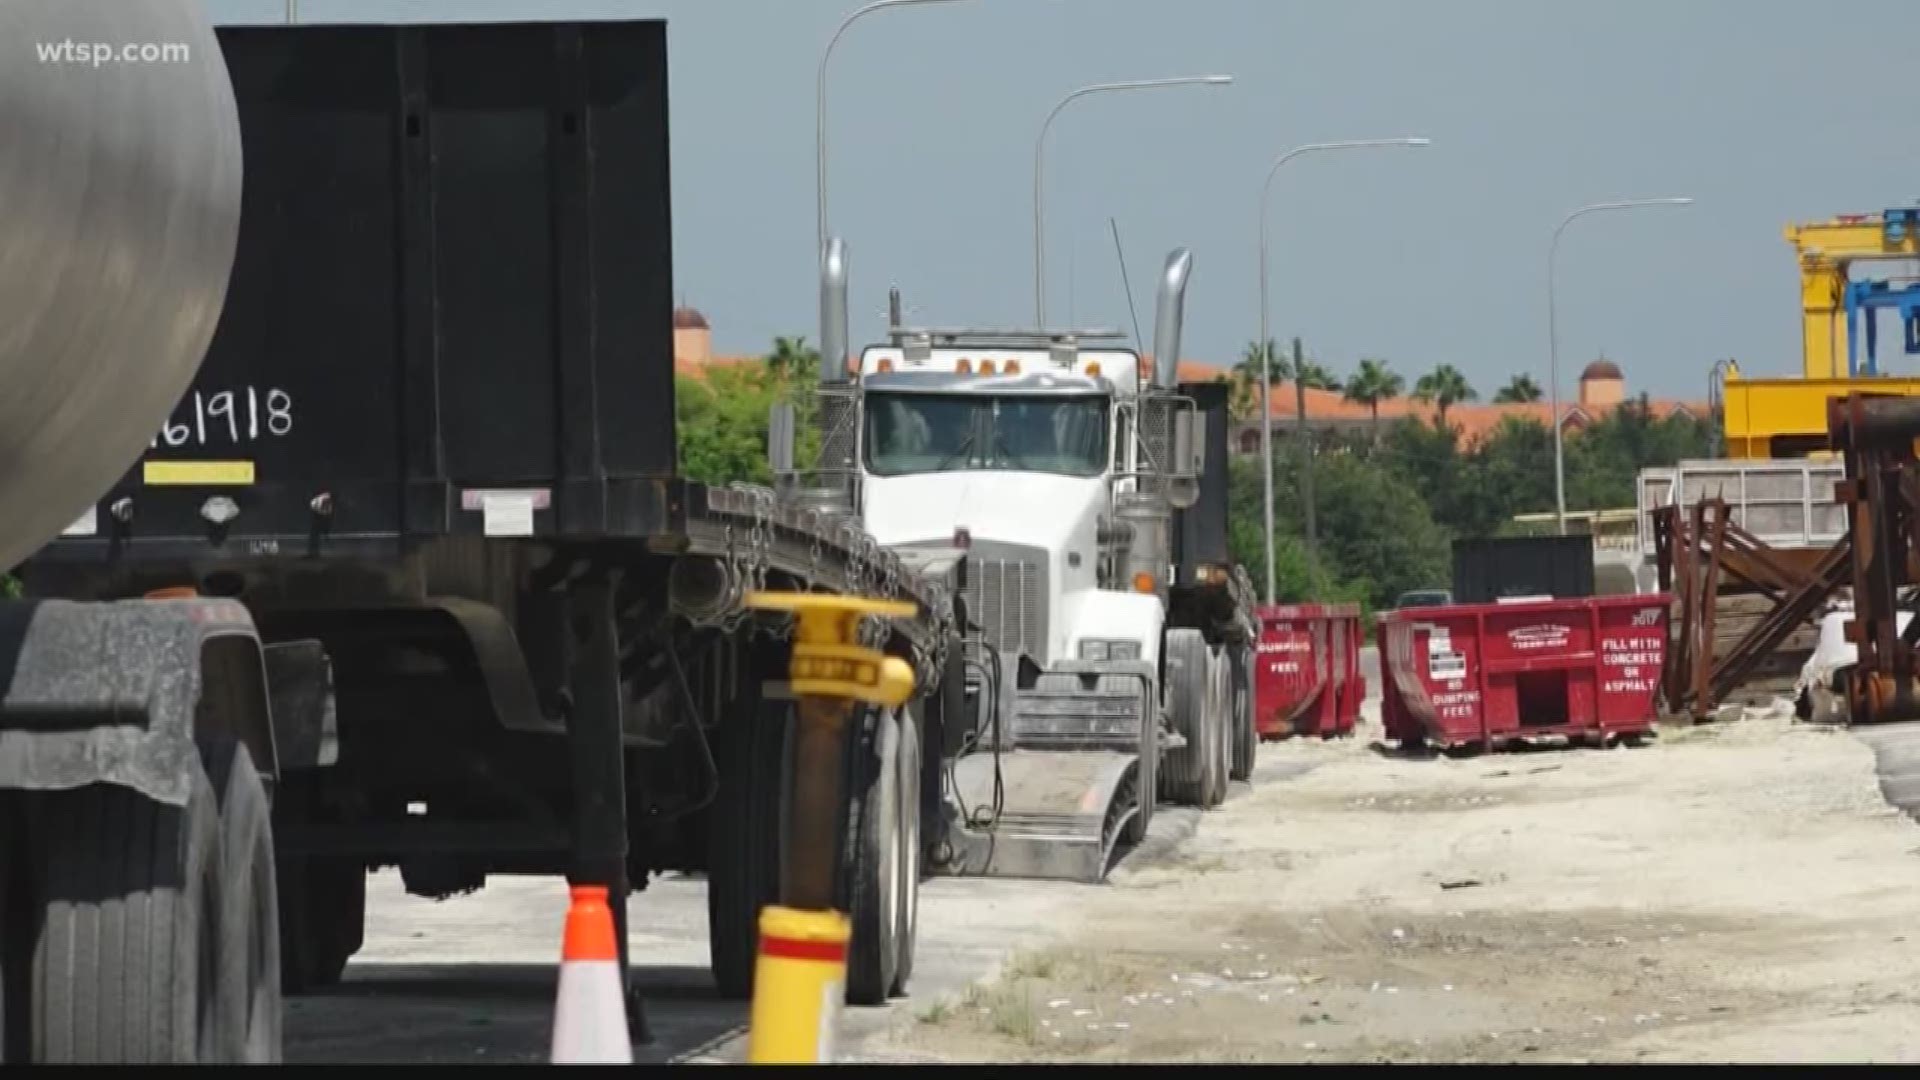 All interstate road closures in the Tampa Bay area were suspended by the Florida Department of Transportation Thursday because of the possible impact Hurricane Dorian could have.

The Selmon Expressway project, which is run by the Tampa Hillsborough Expressway Authority, has secured the worksite on Thursday night.